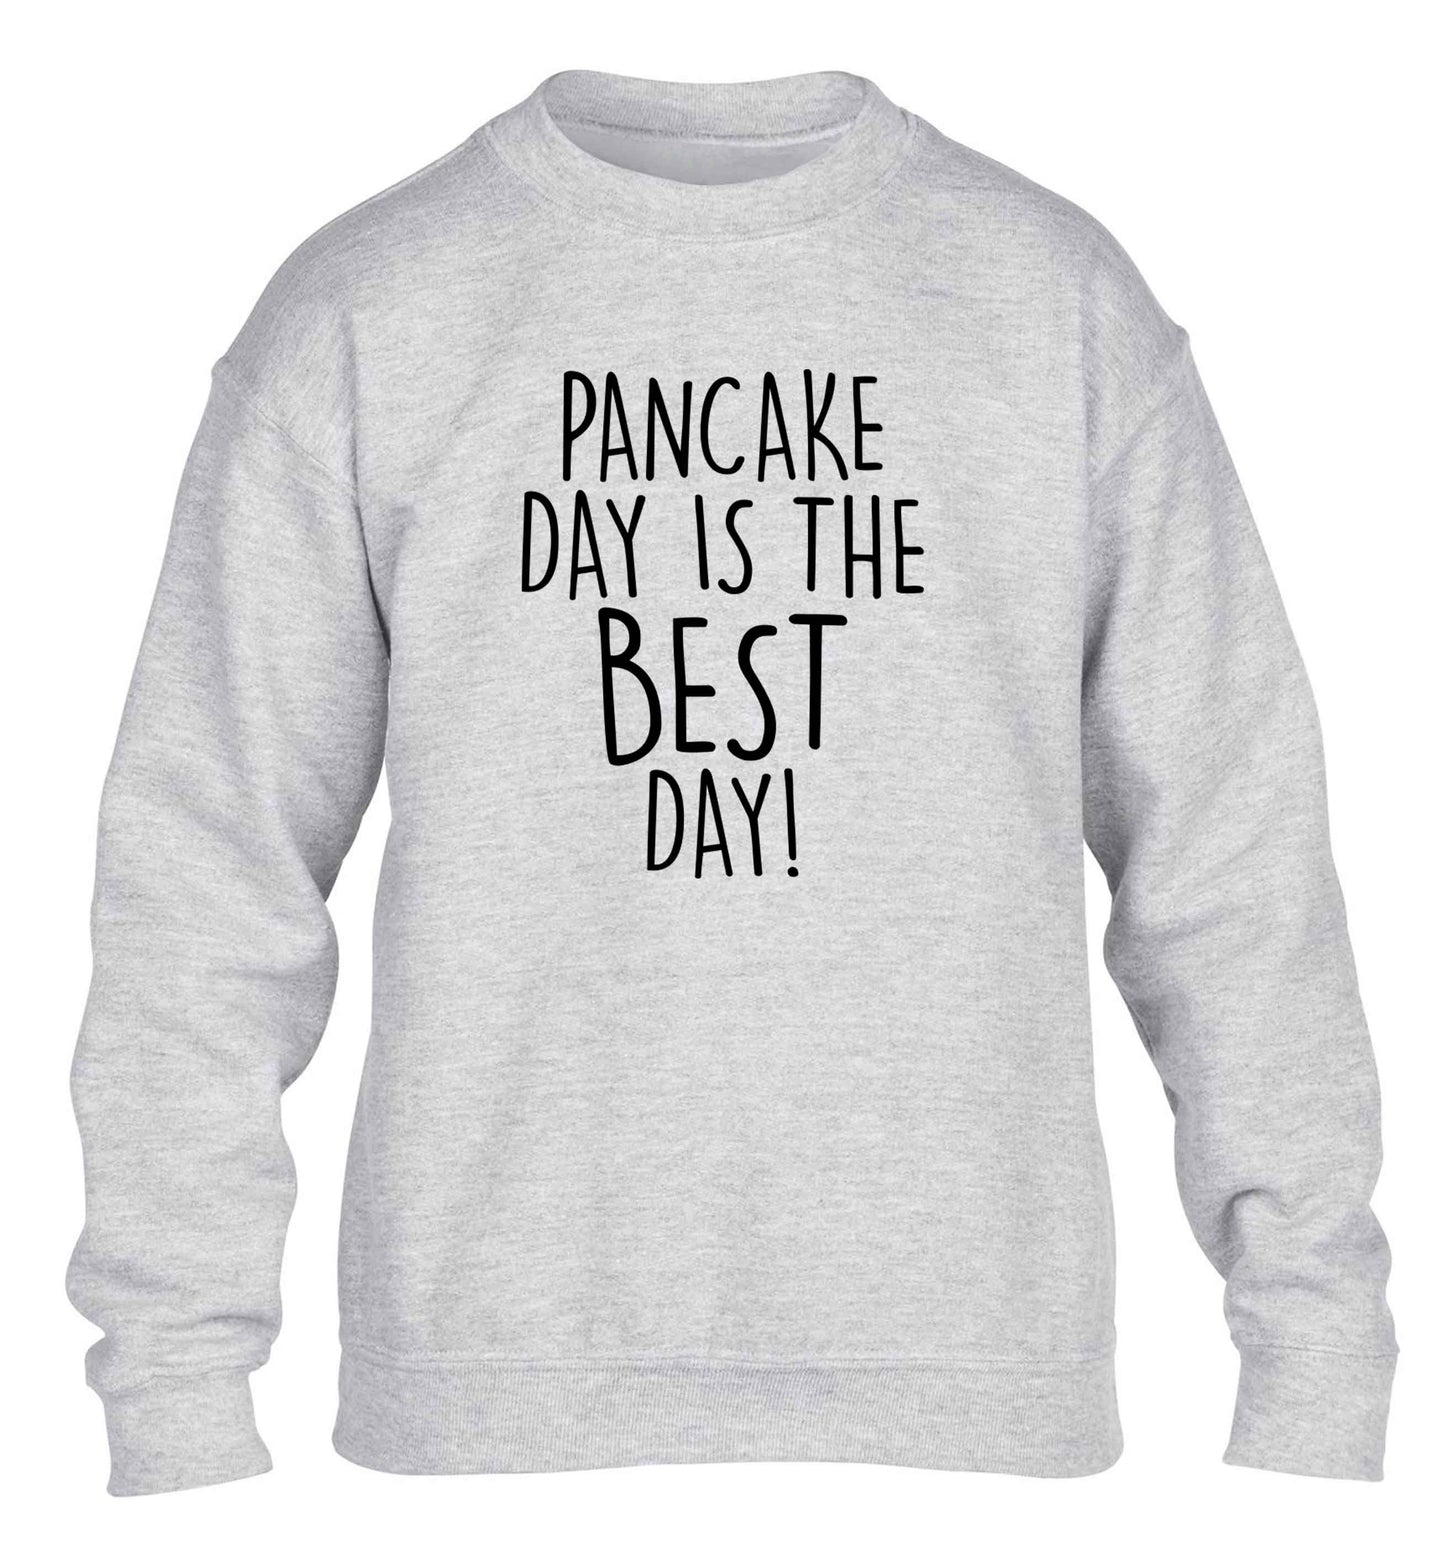 Pancake day is the best day children's grey sweater 12-13 Years